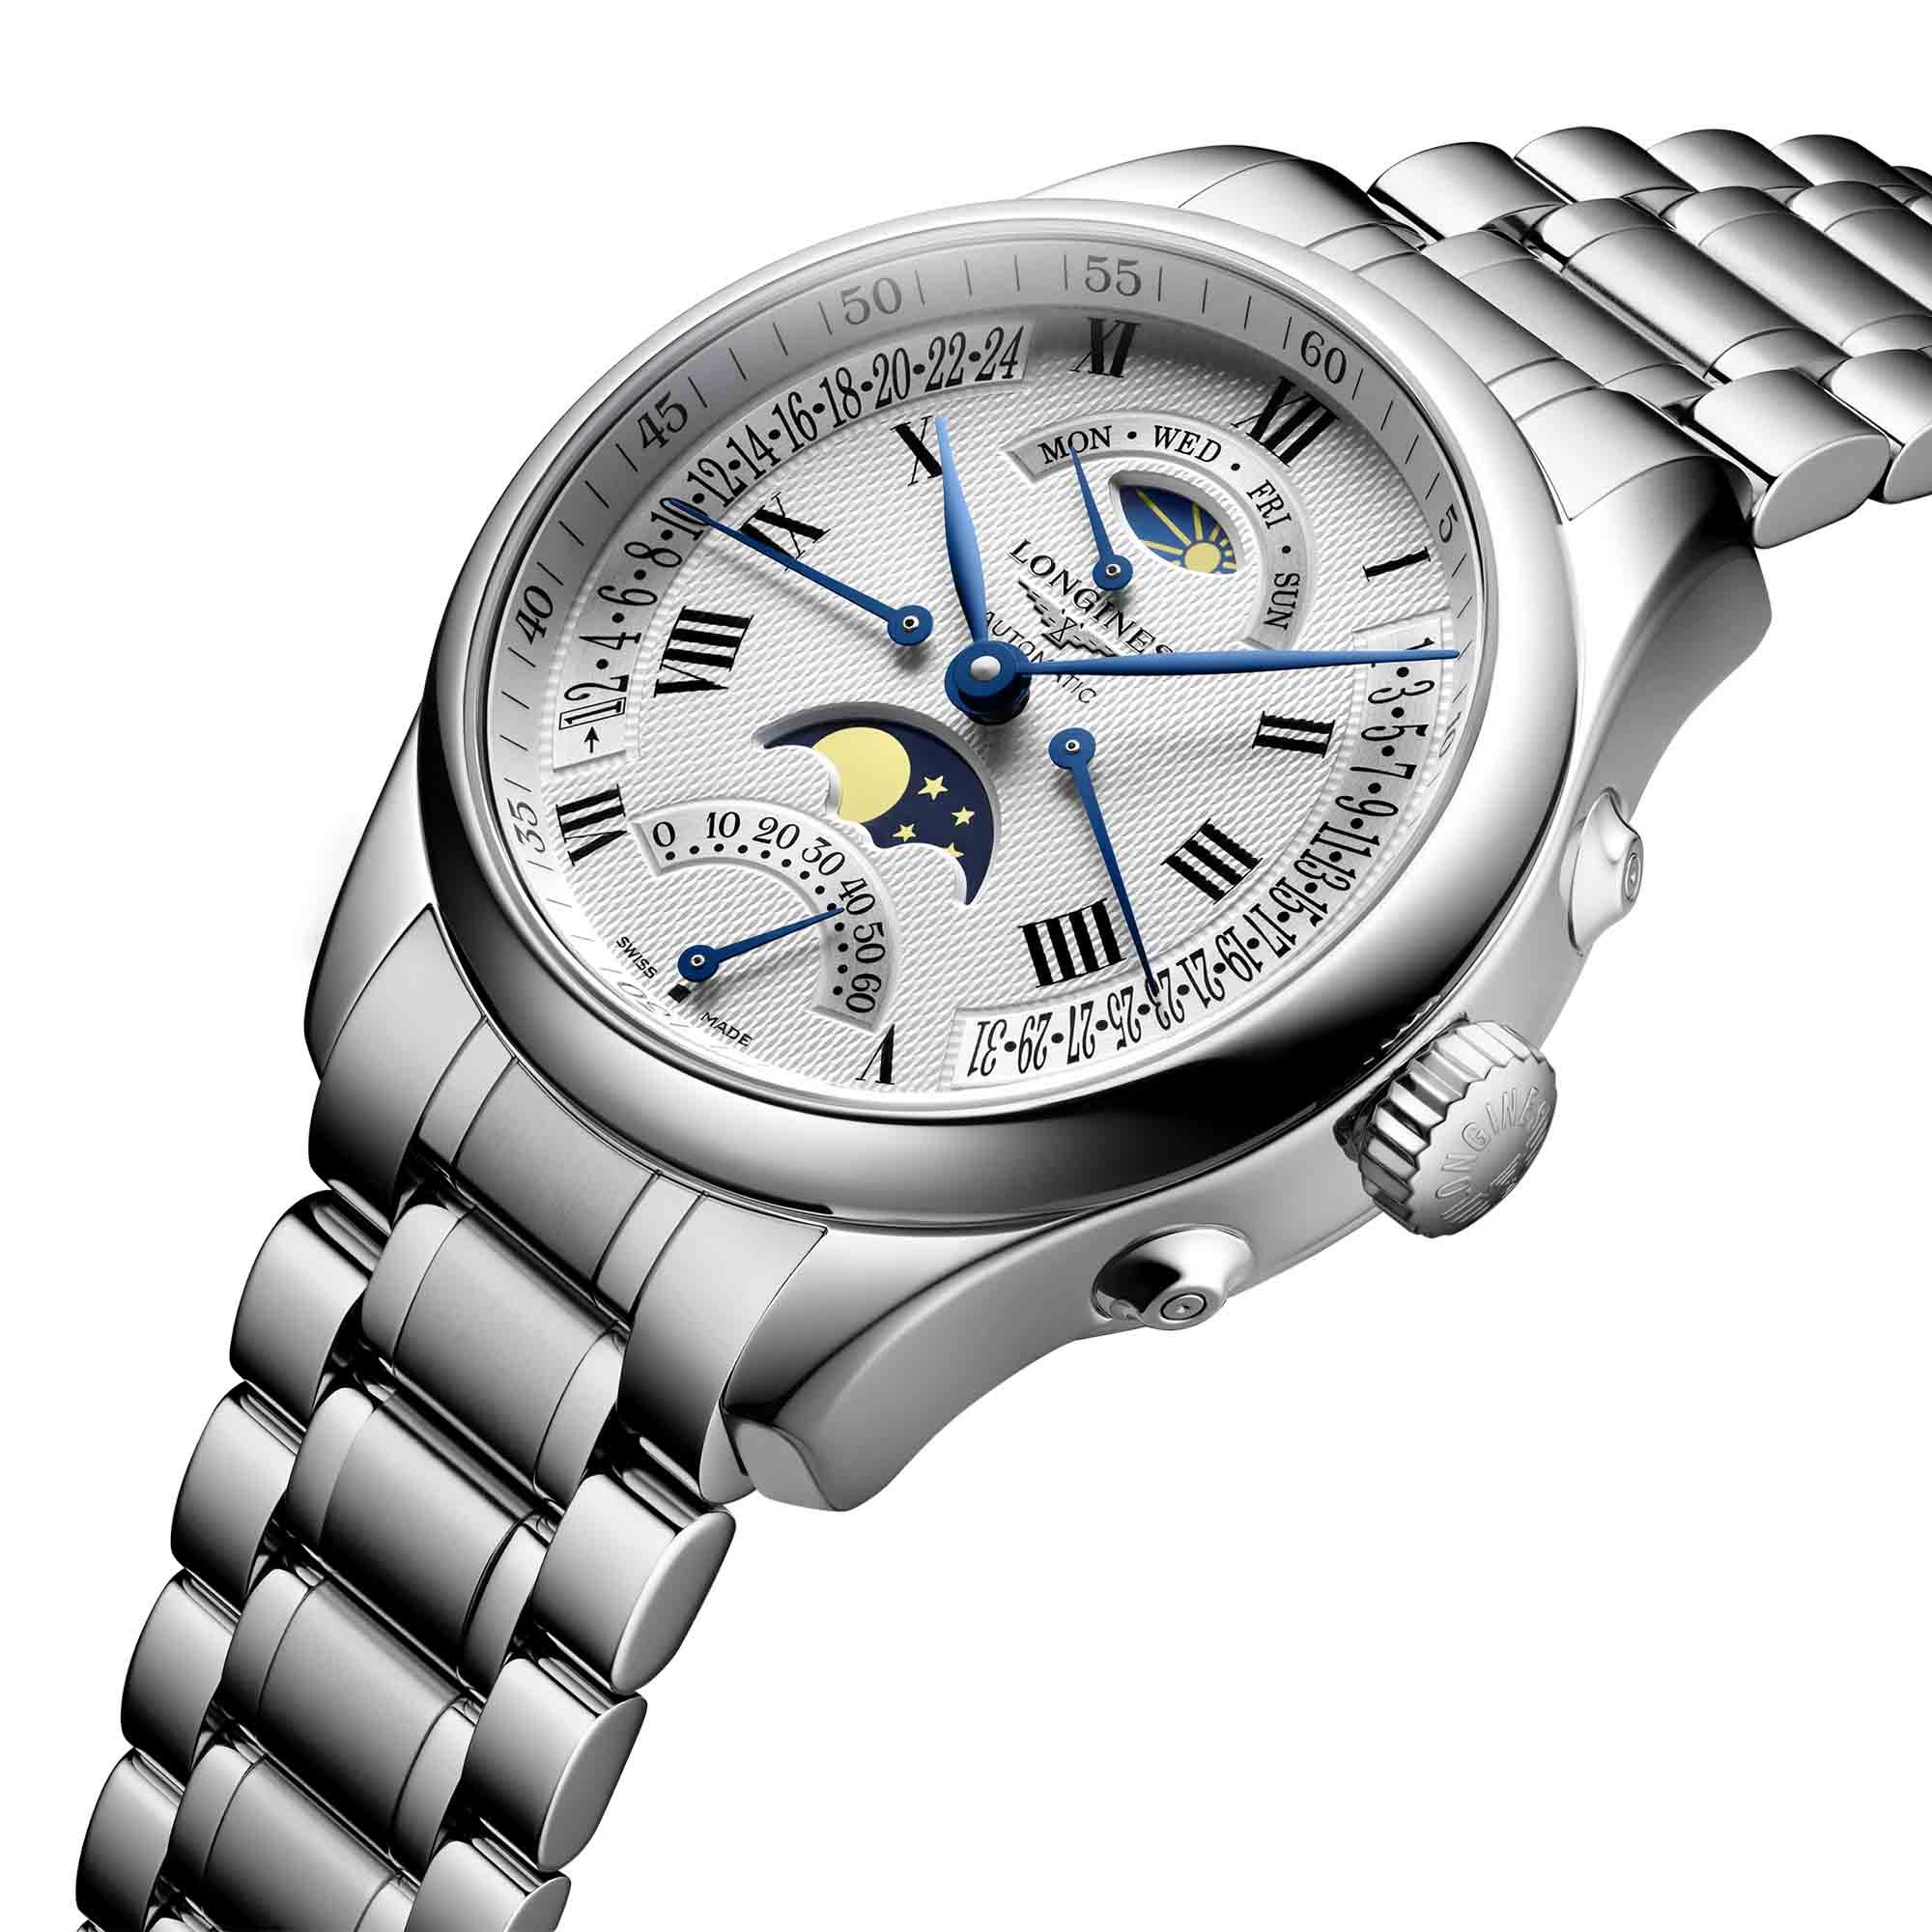 Longines The Longines Master Collection (Ref: L2.738.4.71.6)